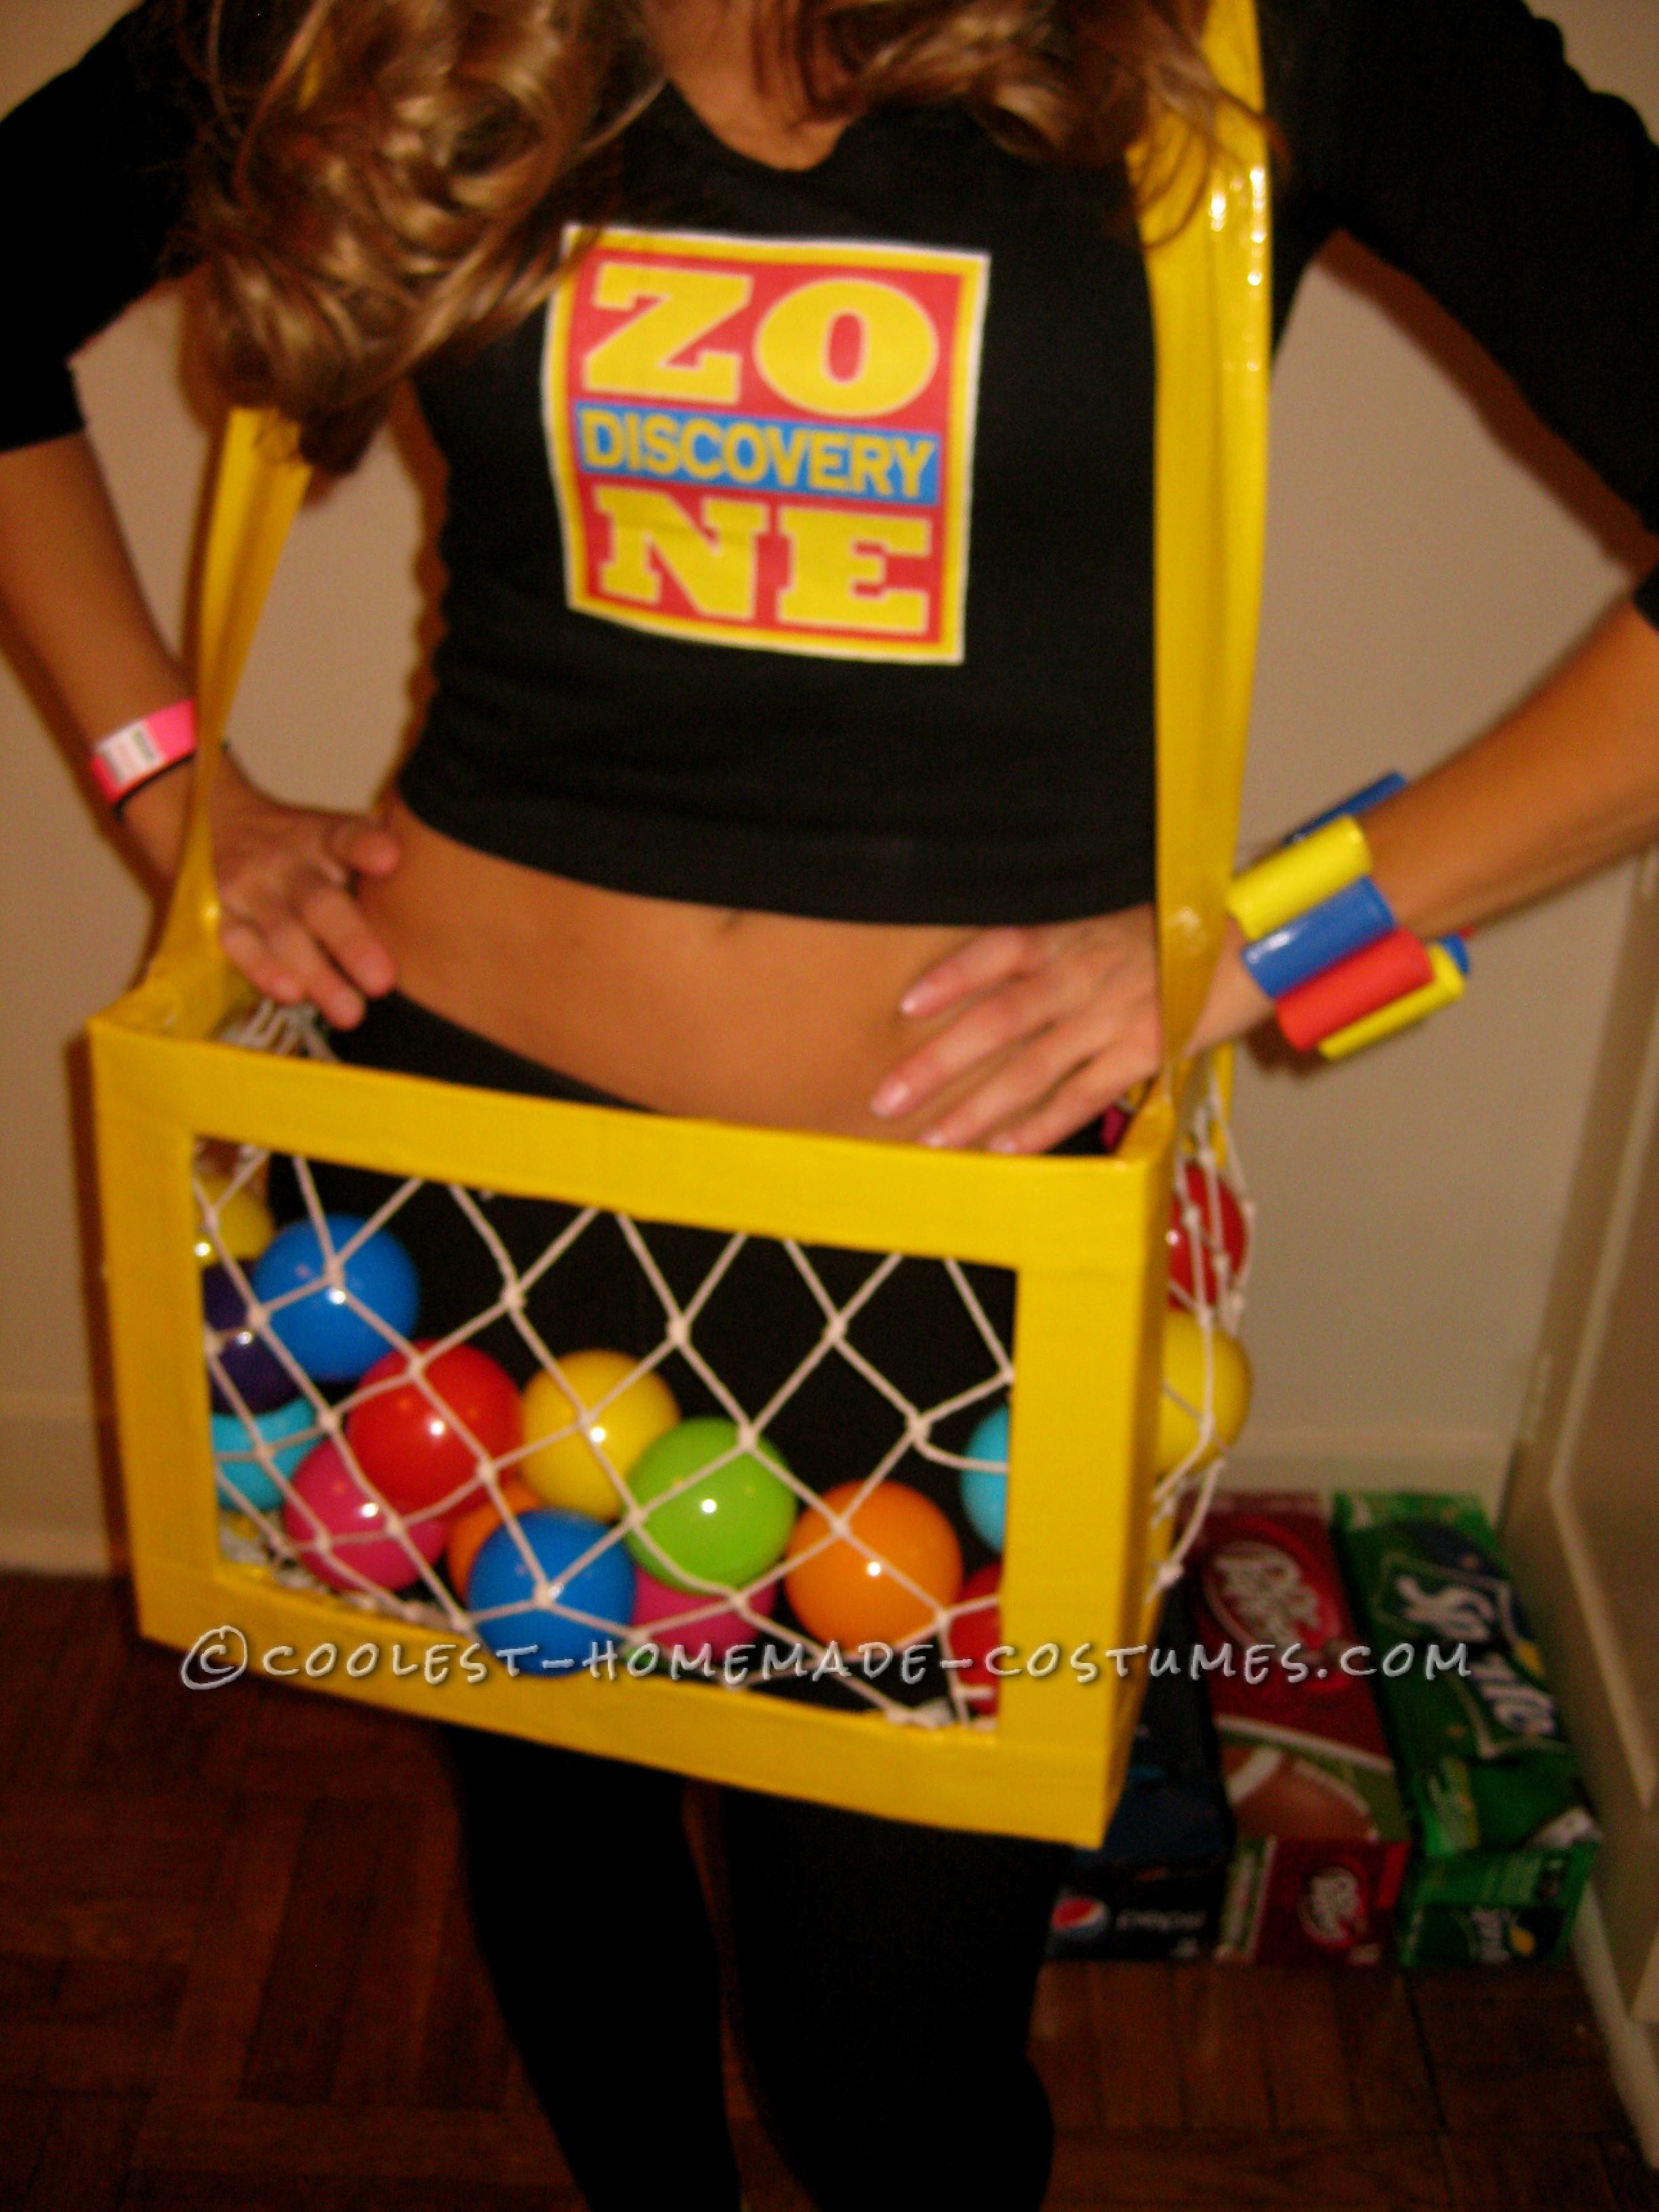 Coolest Discovery Zone Singles Costume